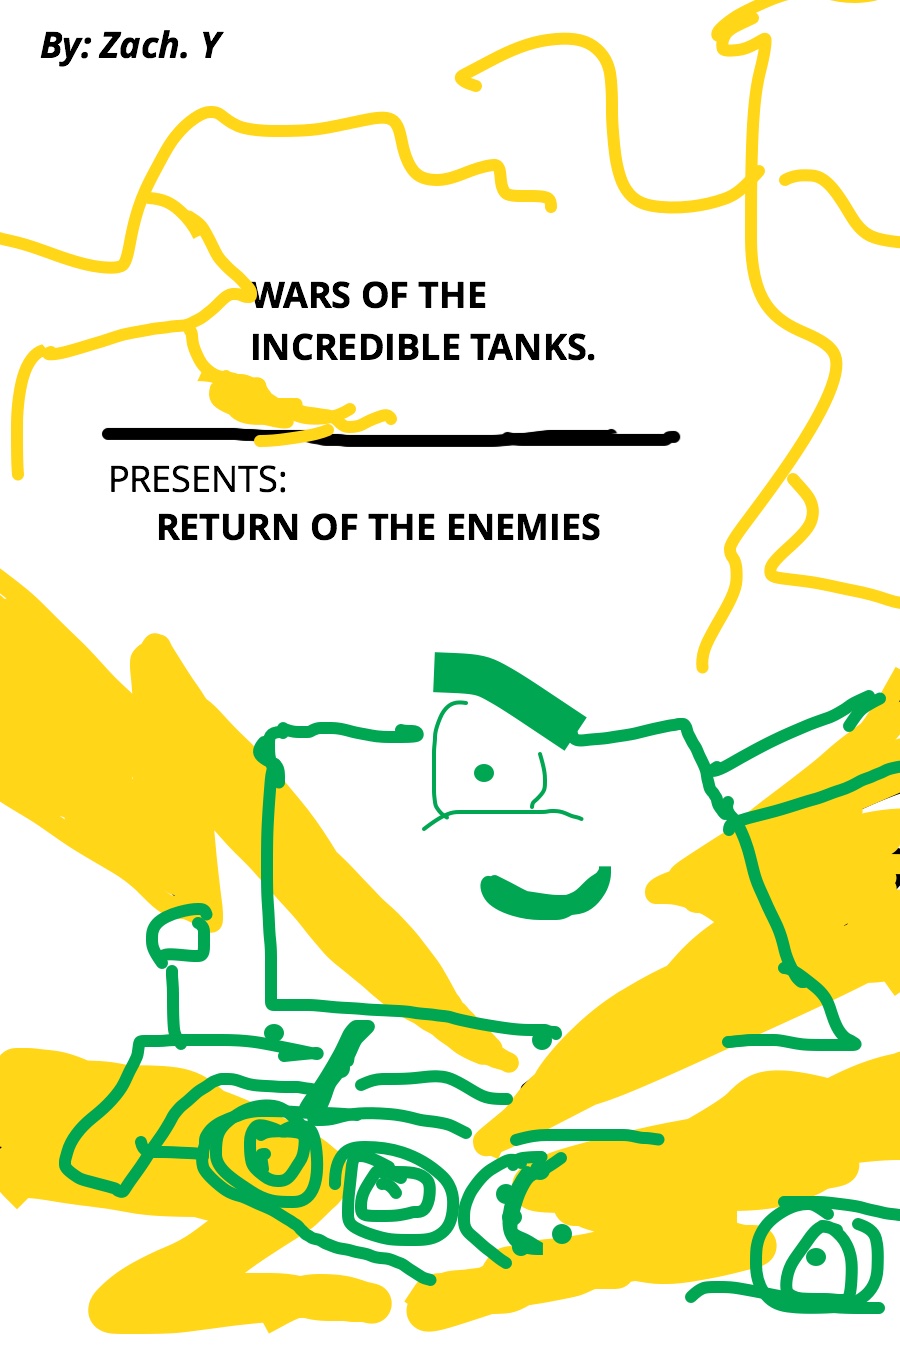 Wars of the Incredible Tanks by Zach Y